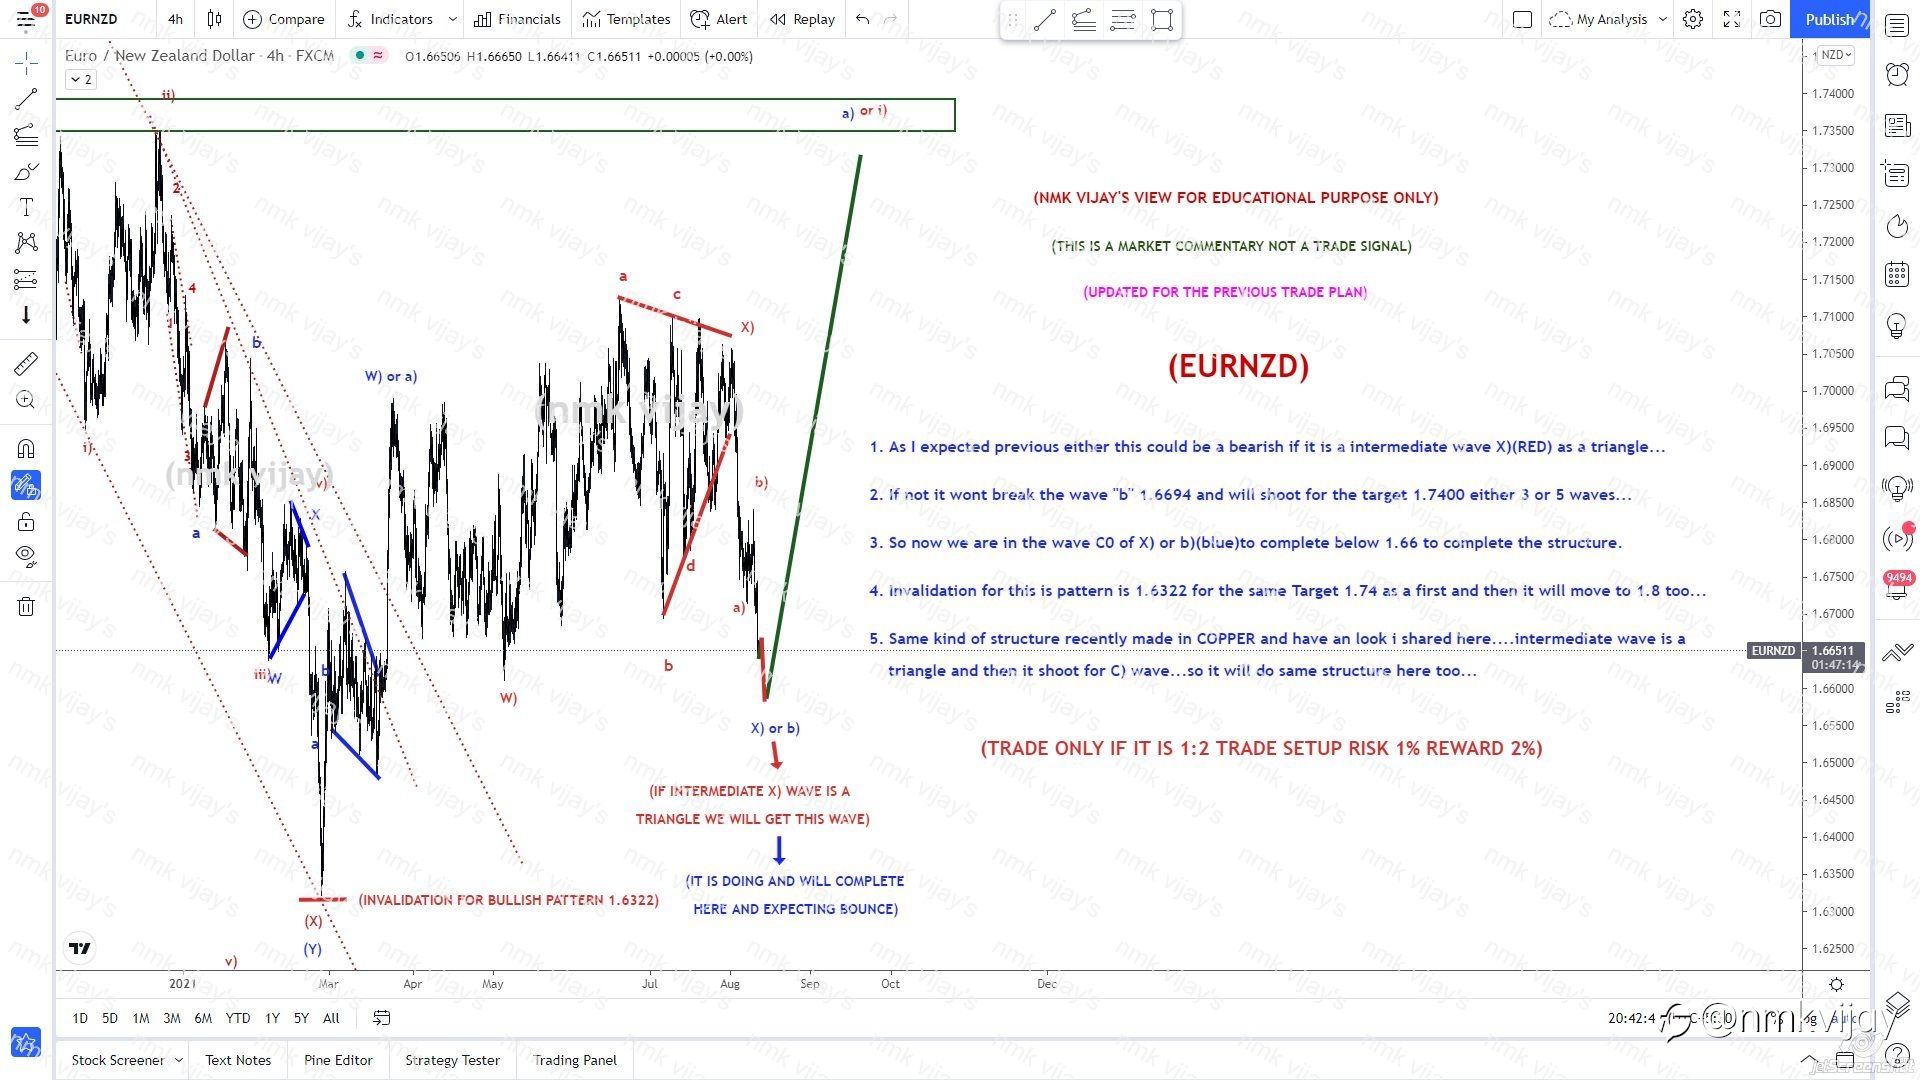 EURNZD Expecting a bounce once it completed the wave b) or X) below 1.66